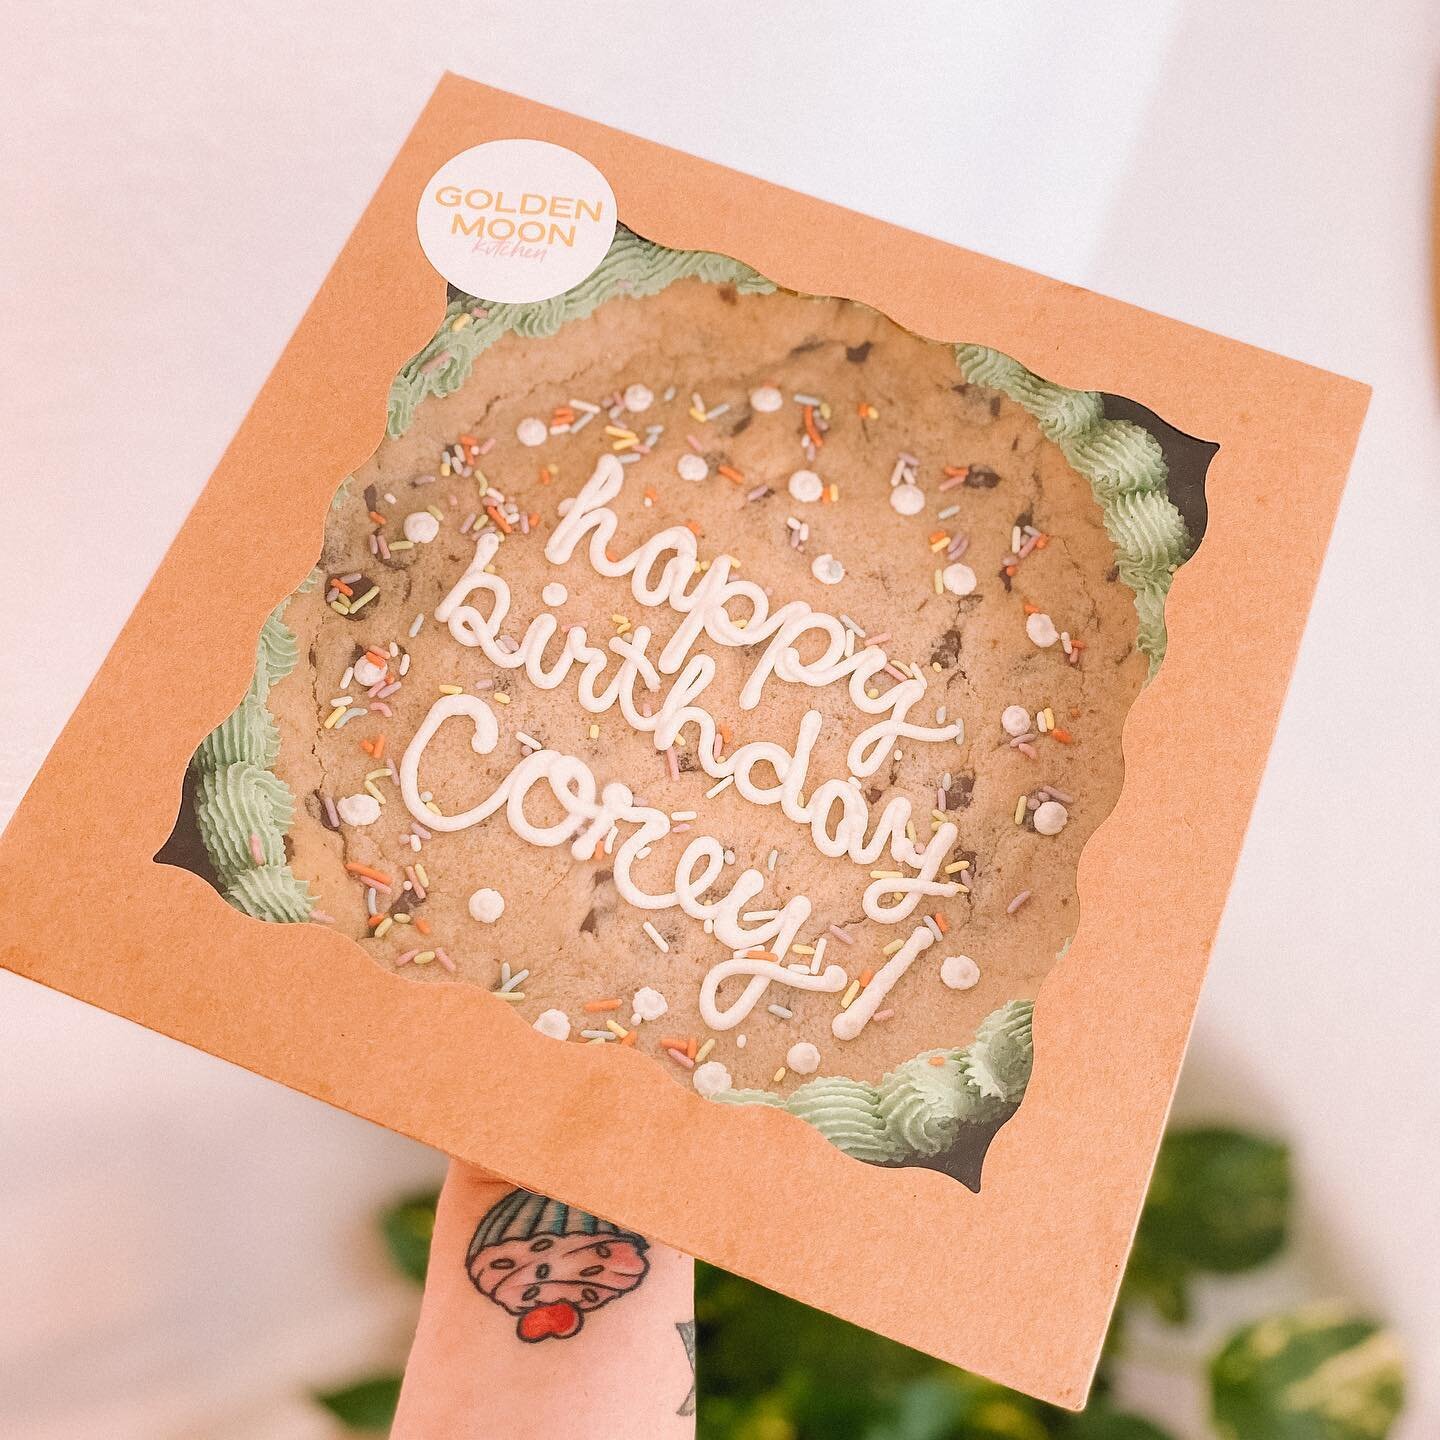 At our pop ups, the mini cookie cake tins are allllways selling out 🍪🍰🌟 Thicc cookie with a soft center &amp; a crispy crust! What&rsquo;s not to love?

Did you know we have whole 10&rdquo; cookie cakes available for order?! You can customize your